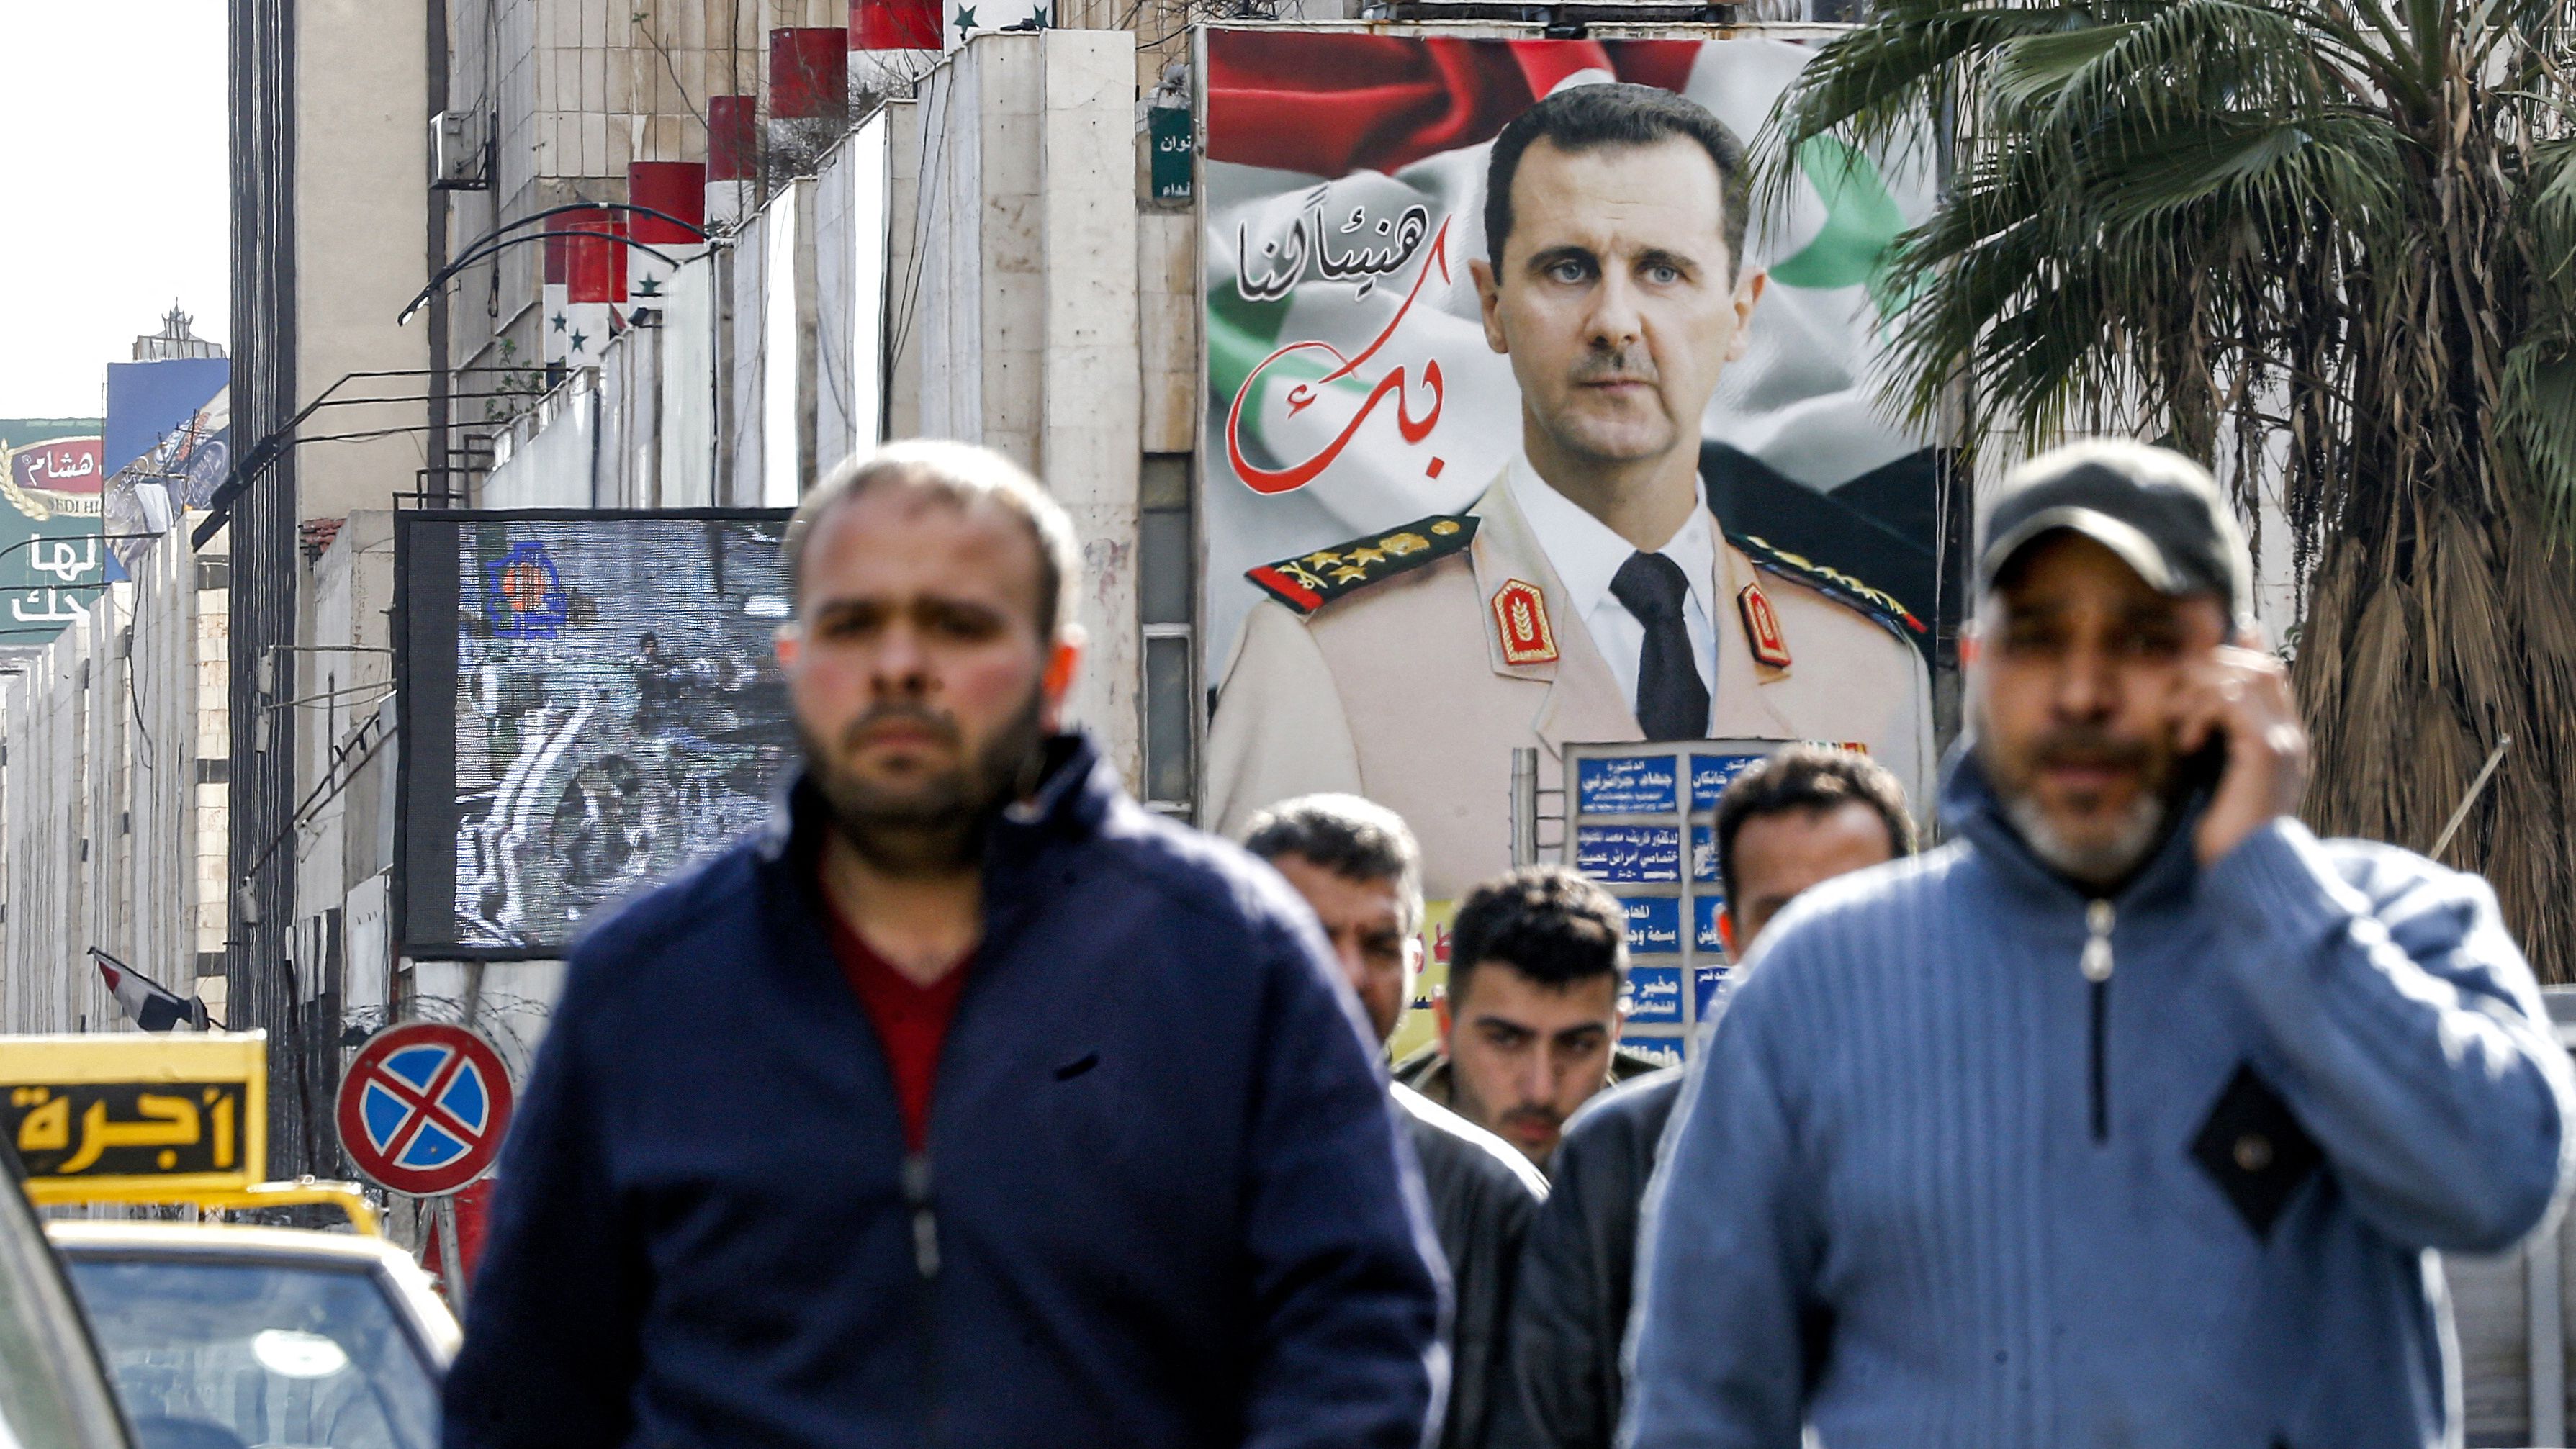 People walk before a giant billboard showing Syria's president Bashar al-Assad along a street in the capital Damascus on 15 December, 2021.